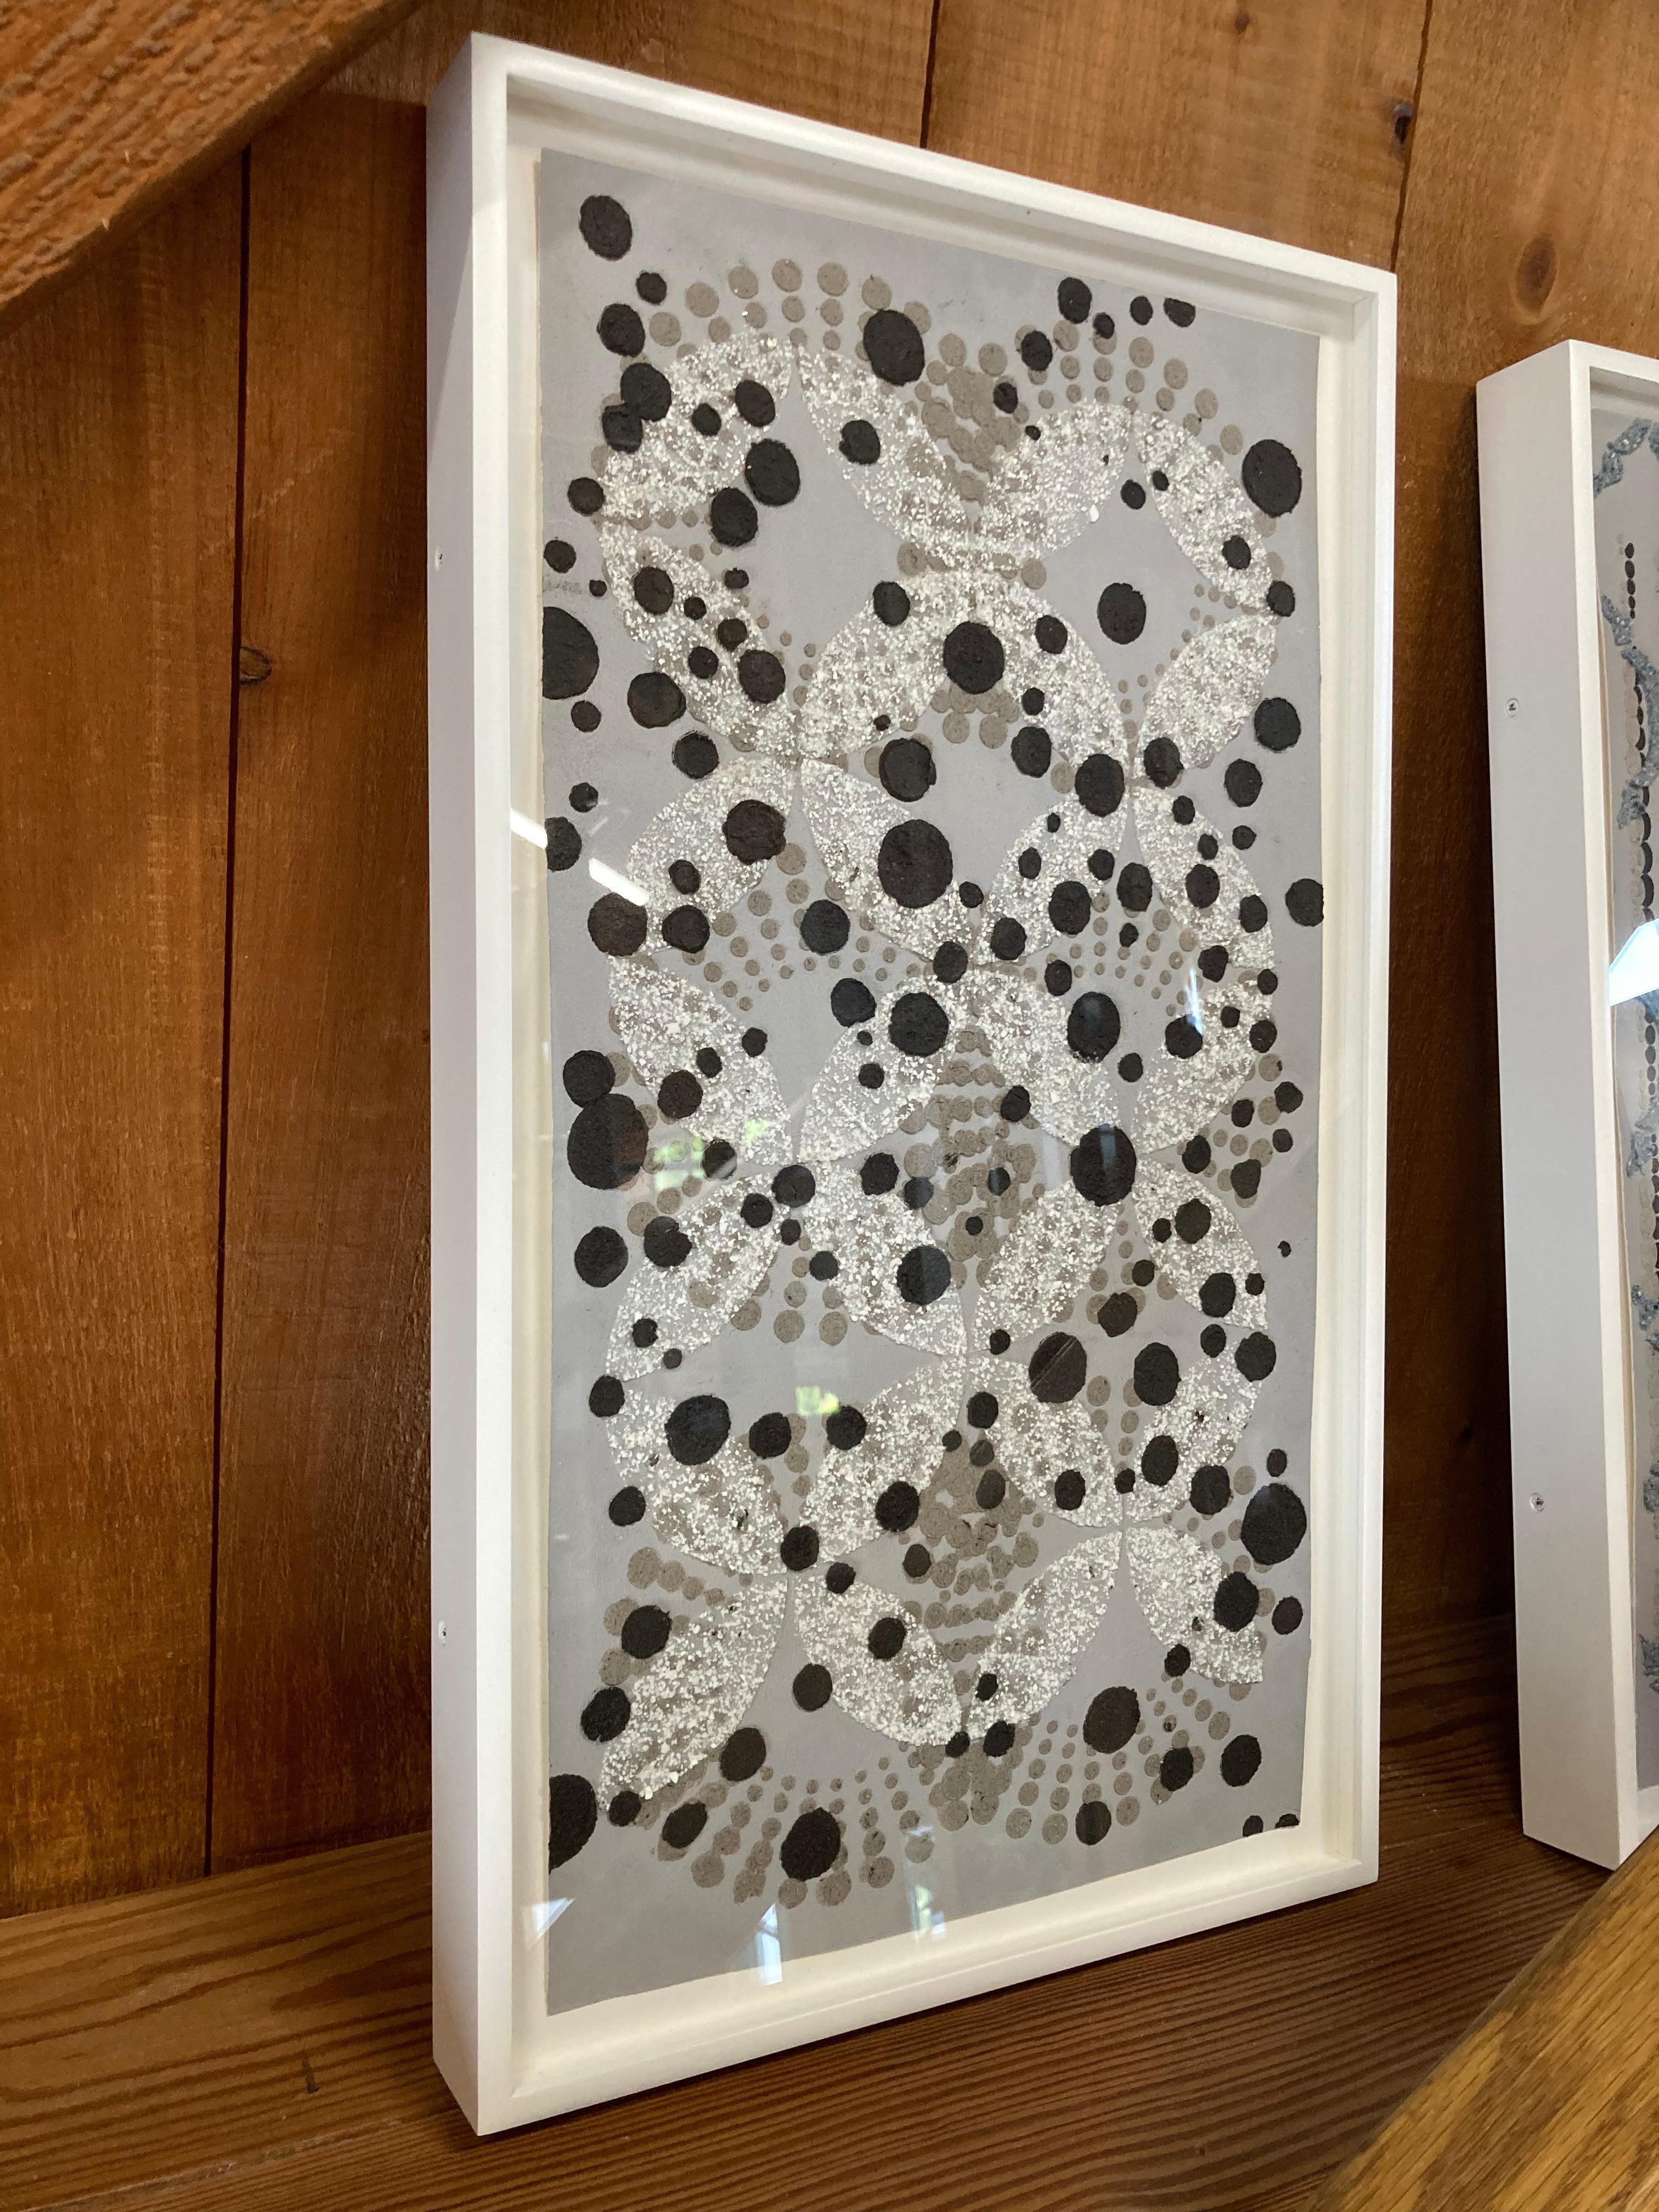 Nontraditional materials add texture to this vertical abstract work on paper by Eleanor White. Wood ash, eggshells and mica medium are carefully applied to gray painted paper creating meticulously ordered, radiating patterns of layered